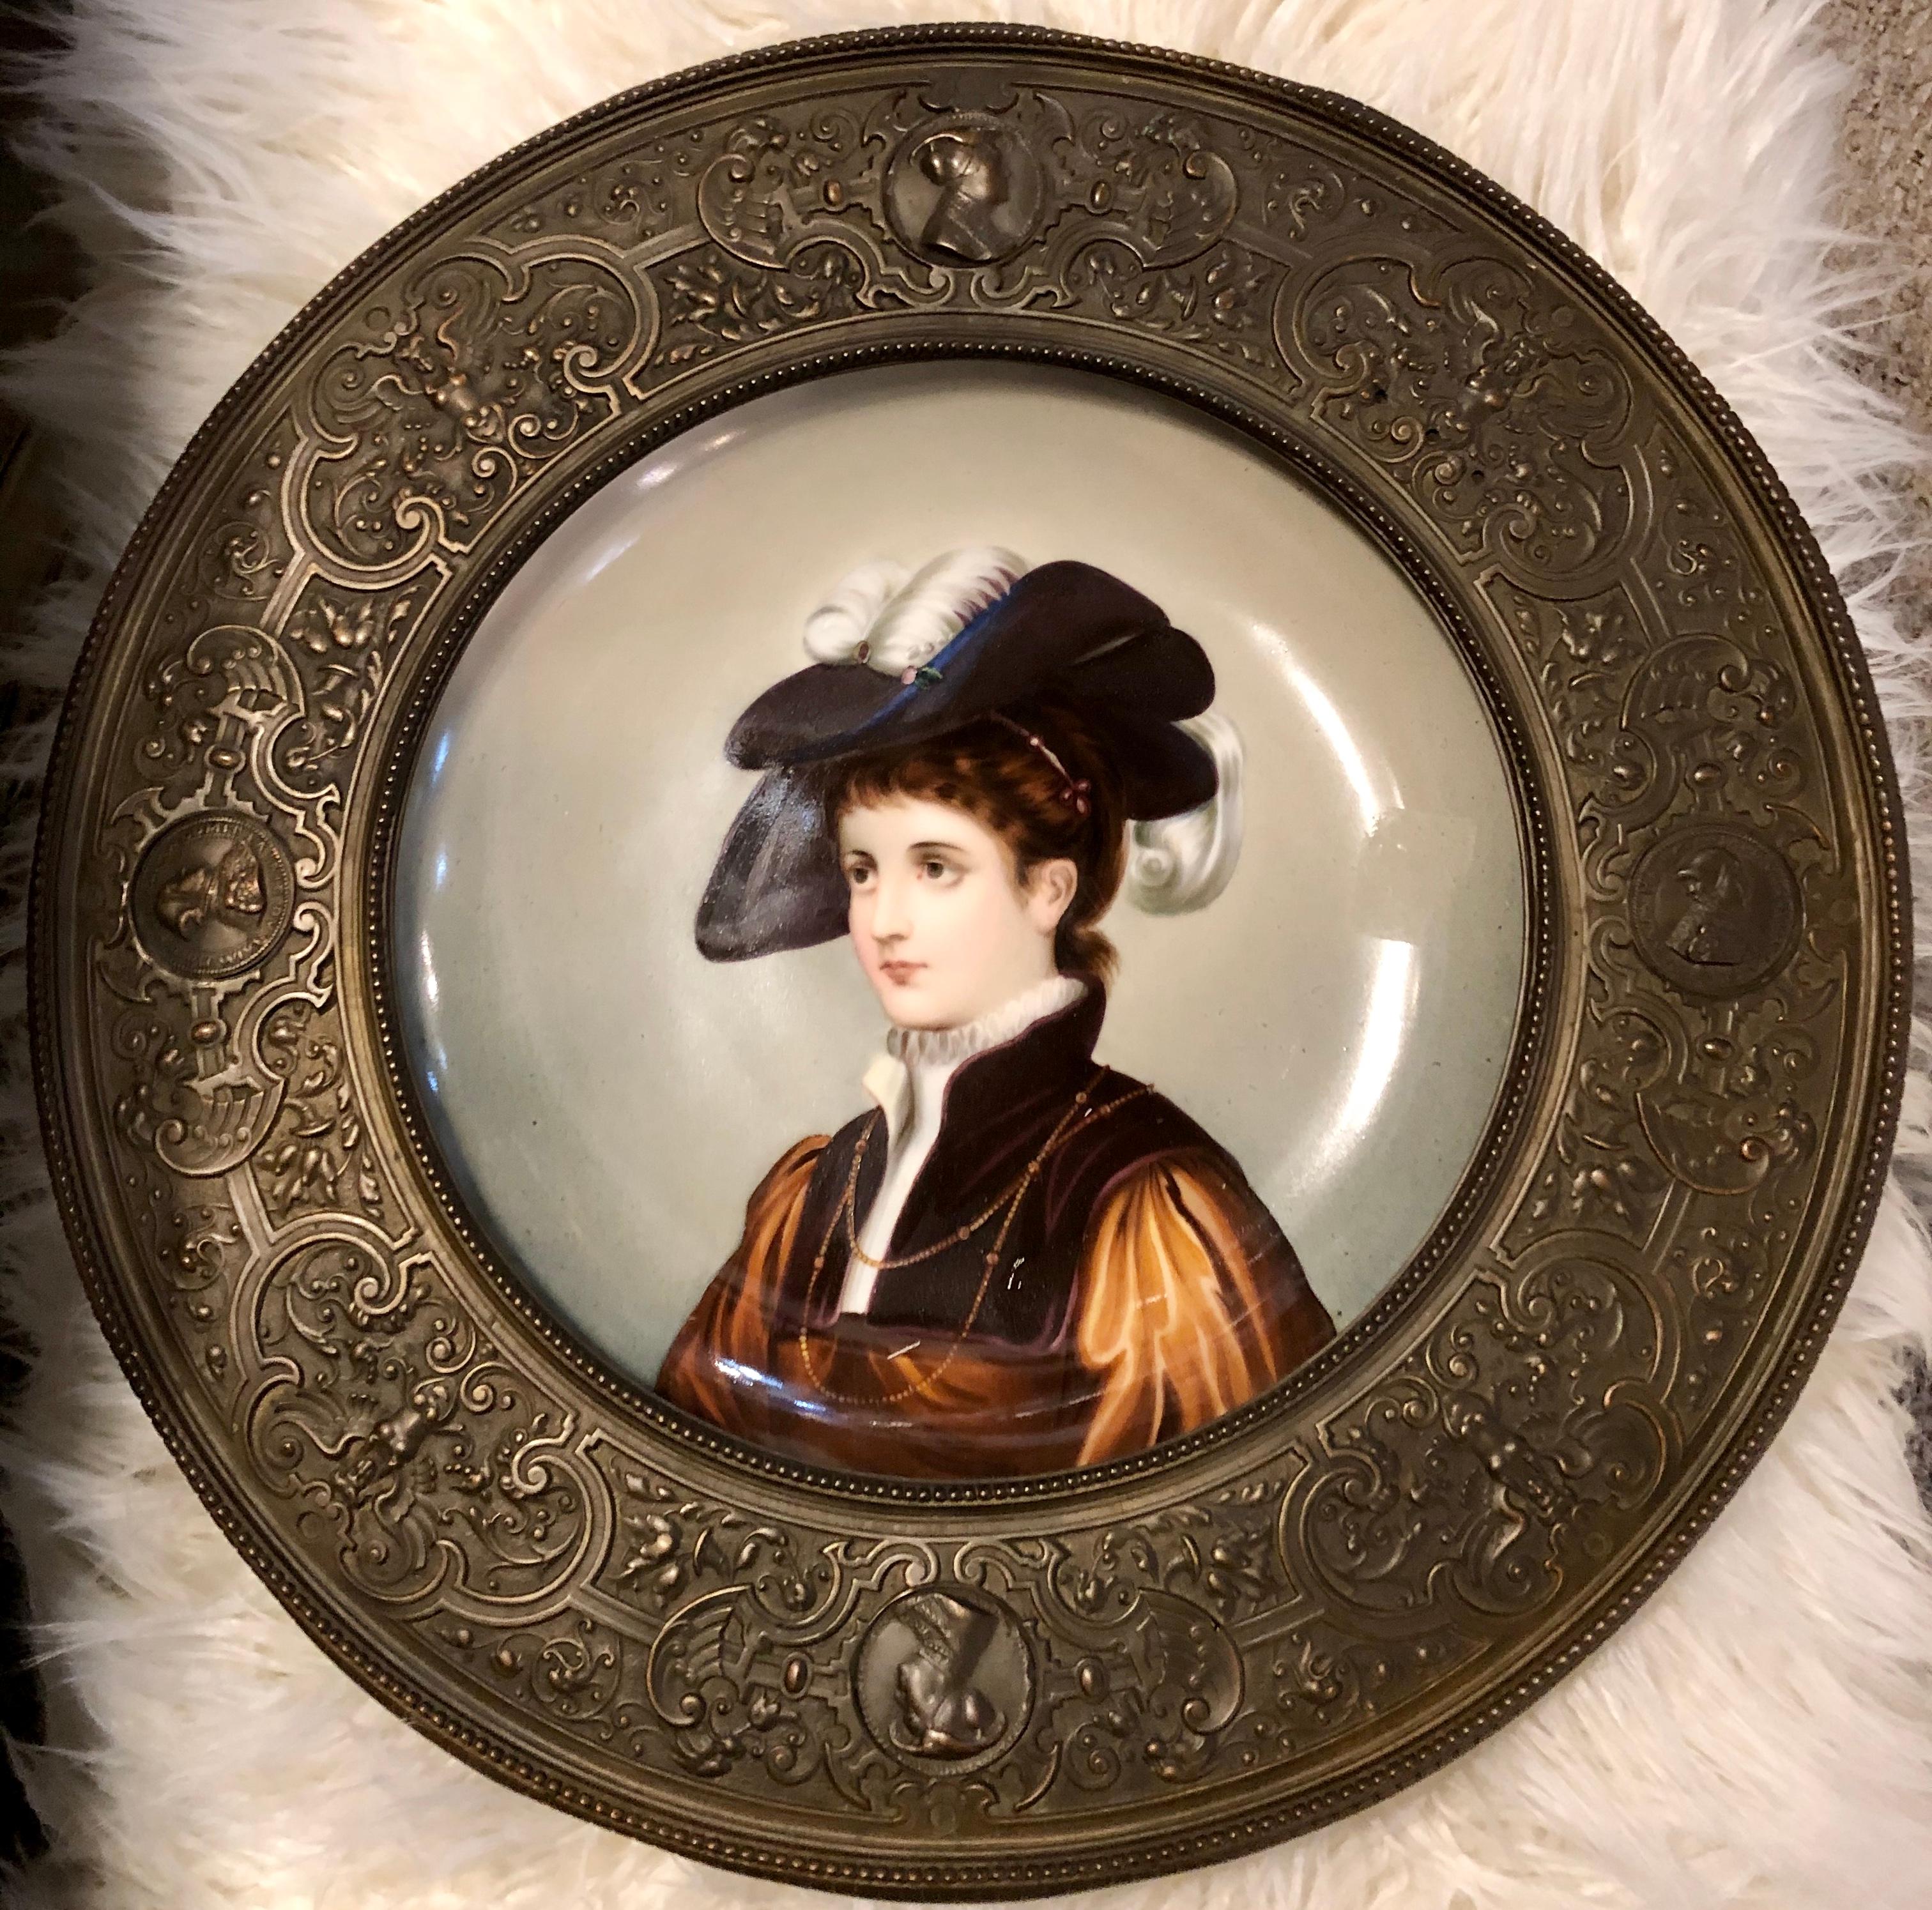 A hand painted porcelain plate framed in a high relief bronze frame. A stunning 1800s Victorian hand painted porcelain portrait with a repousse bronze frame. This alluring portrait was skillfully hand painted on a plate of porcelain. The porcelain